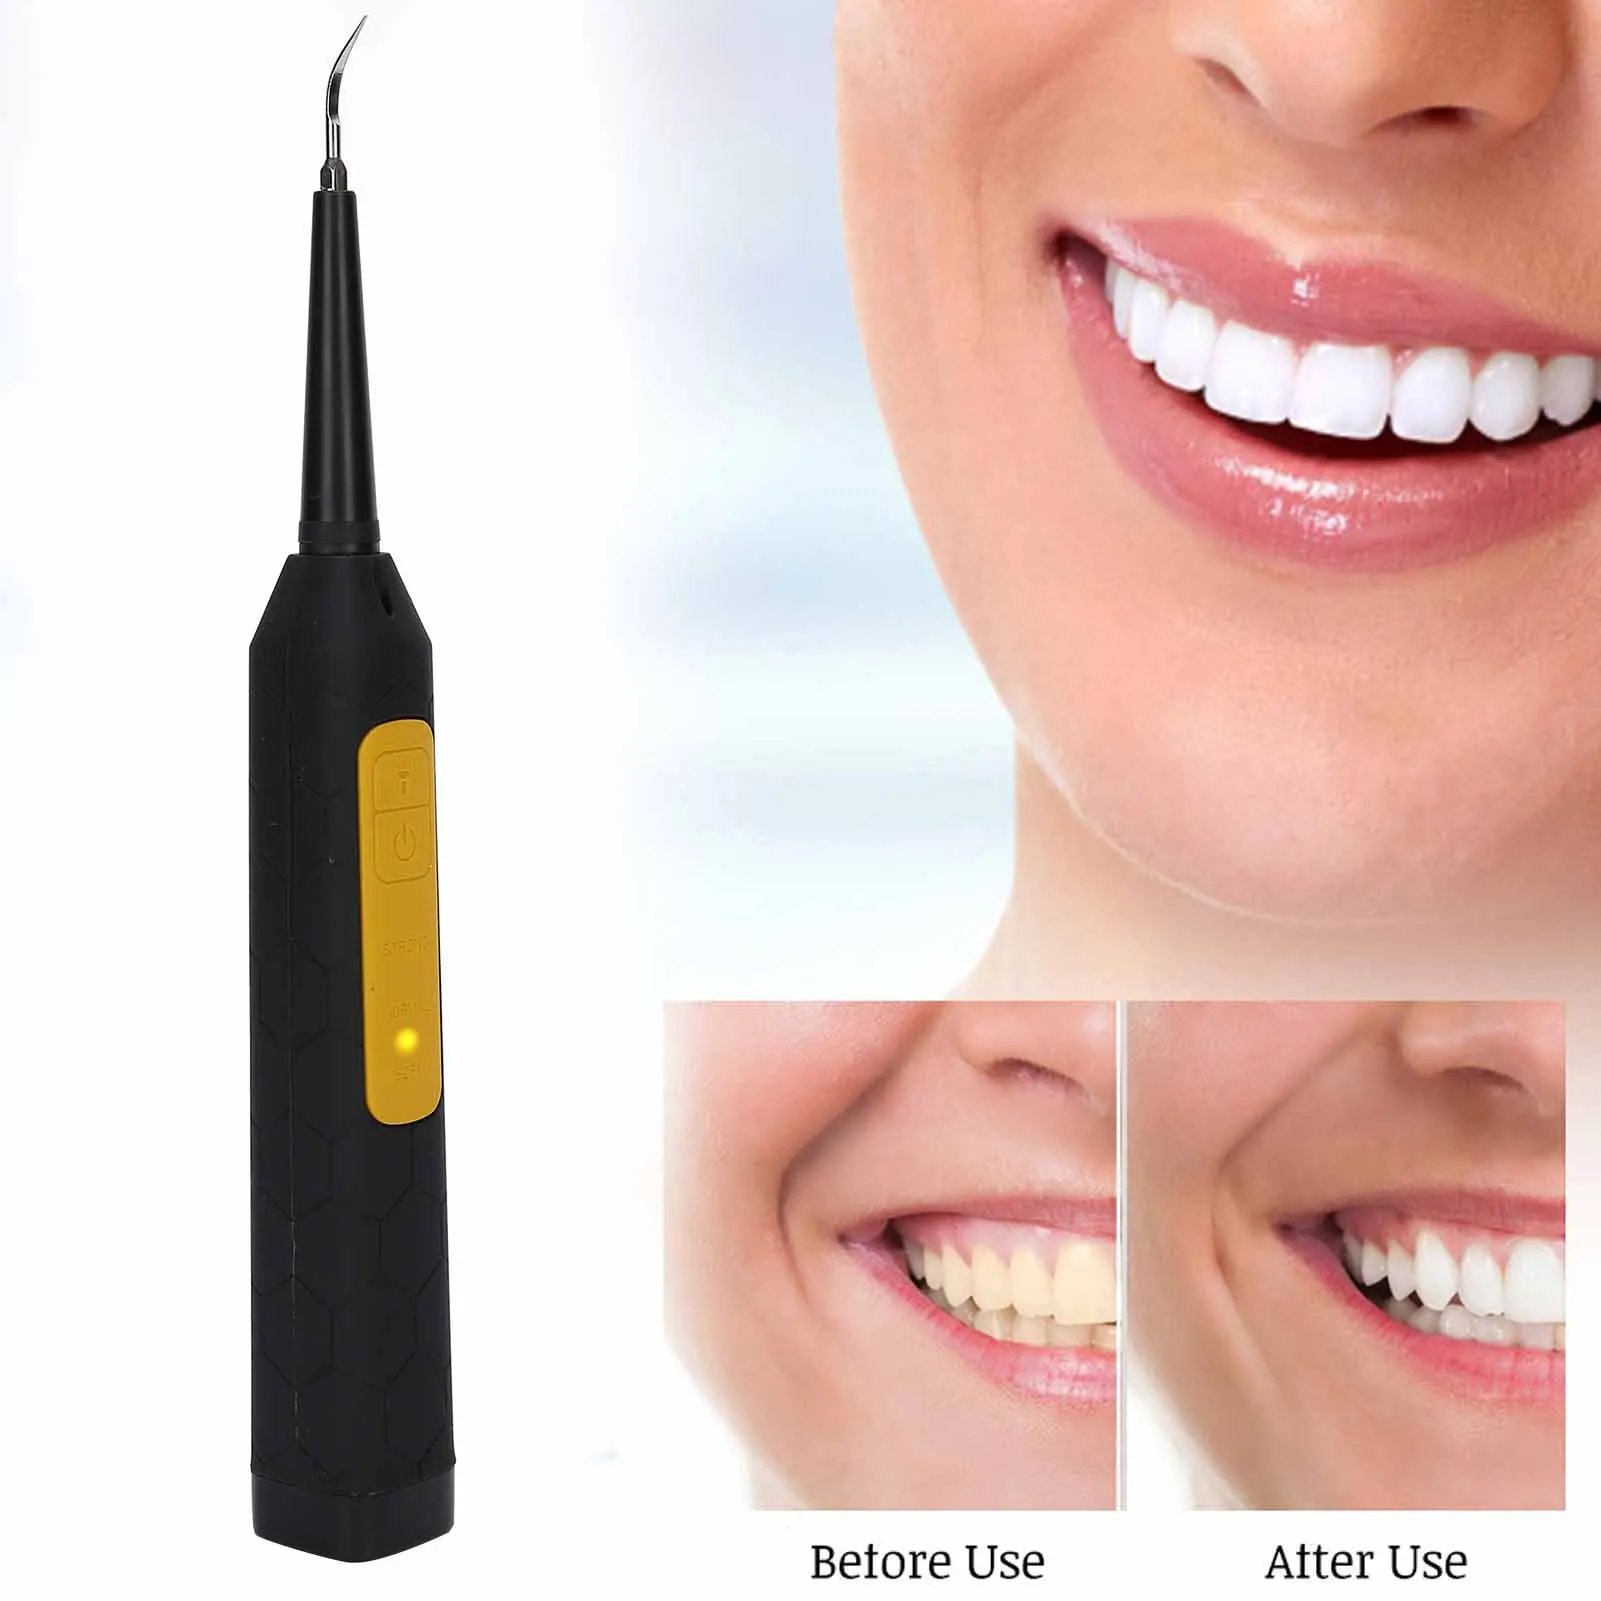 HighQuality Stainless Steel Head Tooth Cleaner Electric Calculus Remover Portable Teeth Tartar Remover Oral Care Tool USB Charg